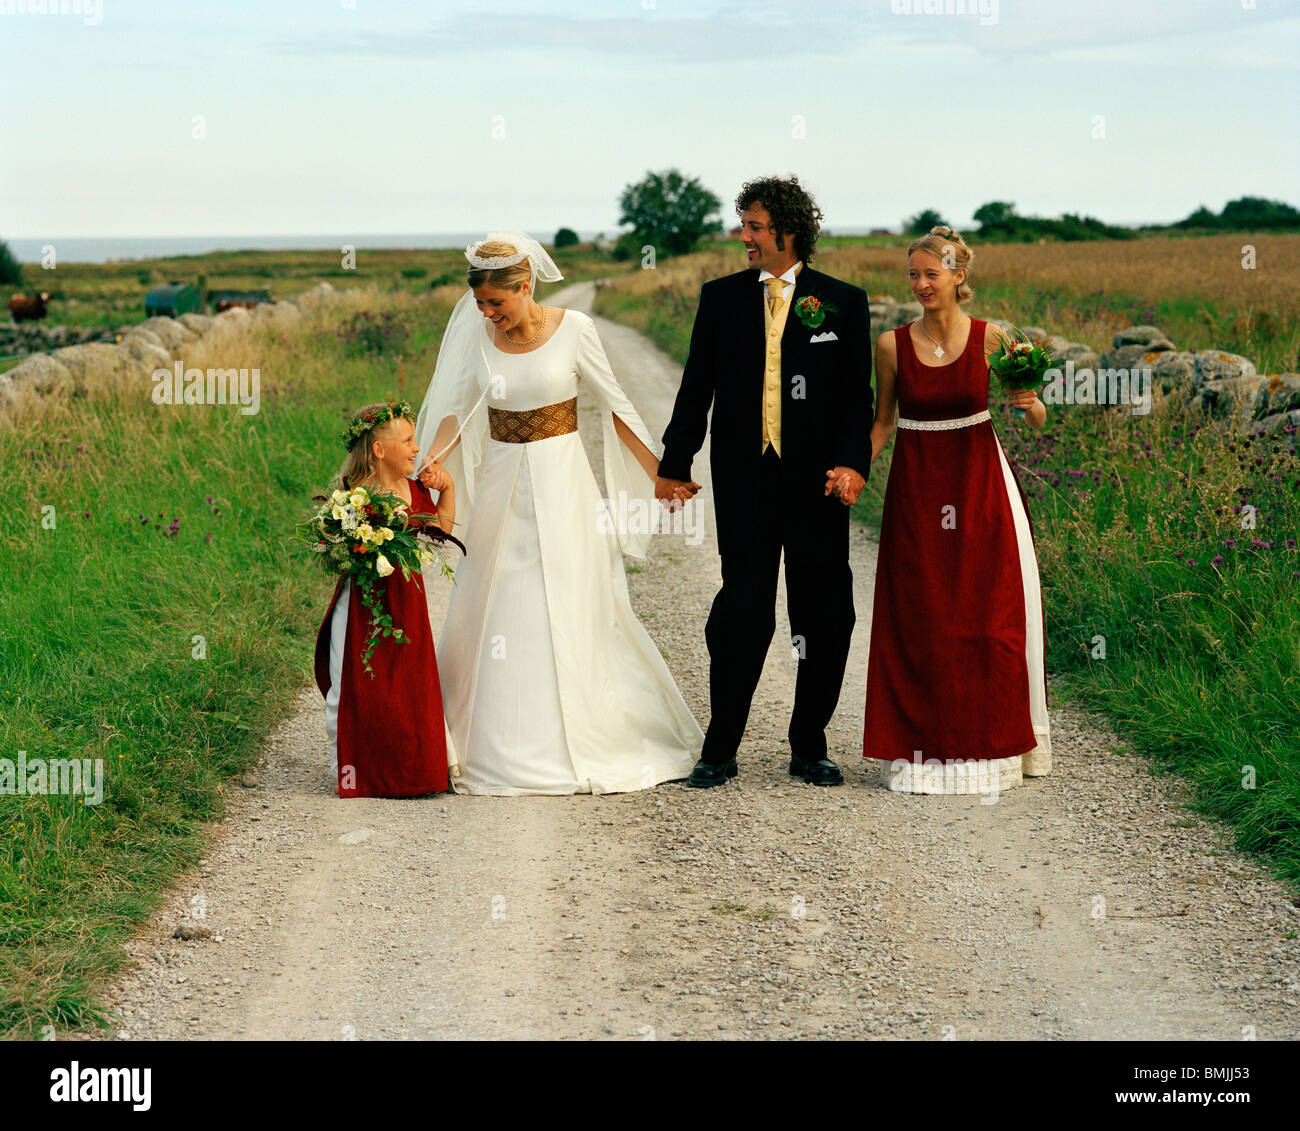 Scandinavia, Sweden, Oland, Bride and groom with bridesmaid and flower girl Stock Photo